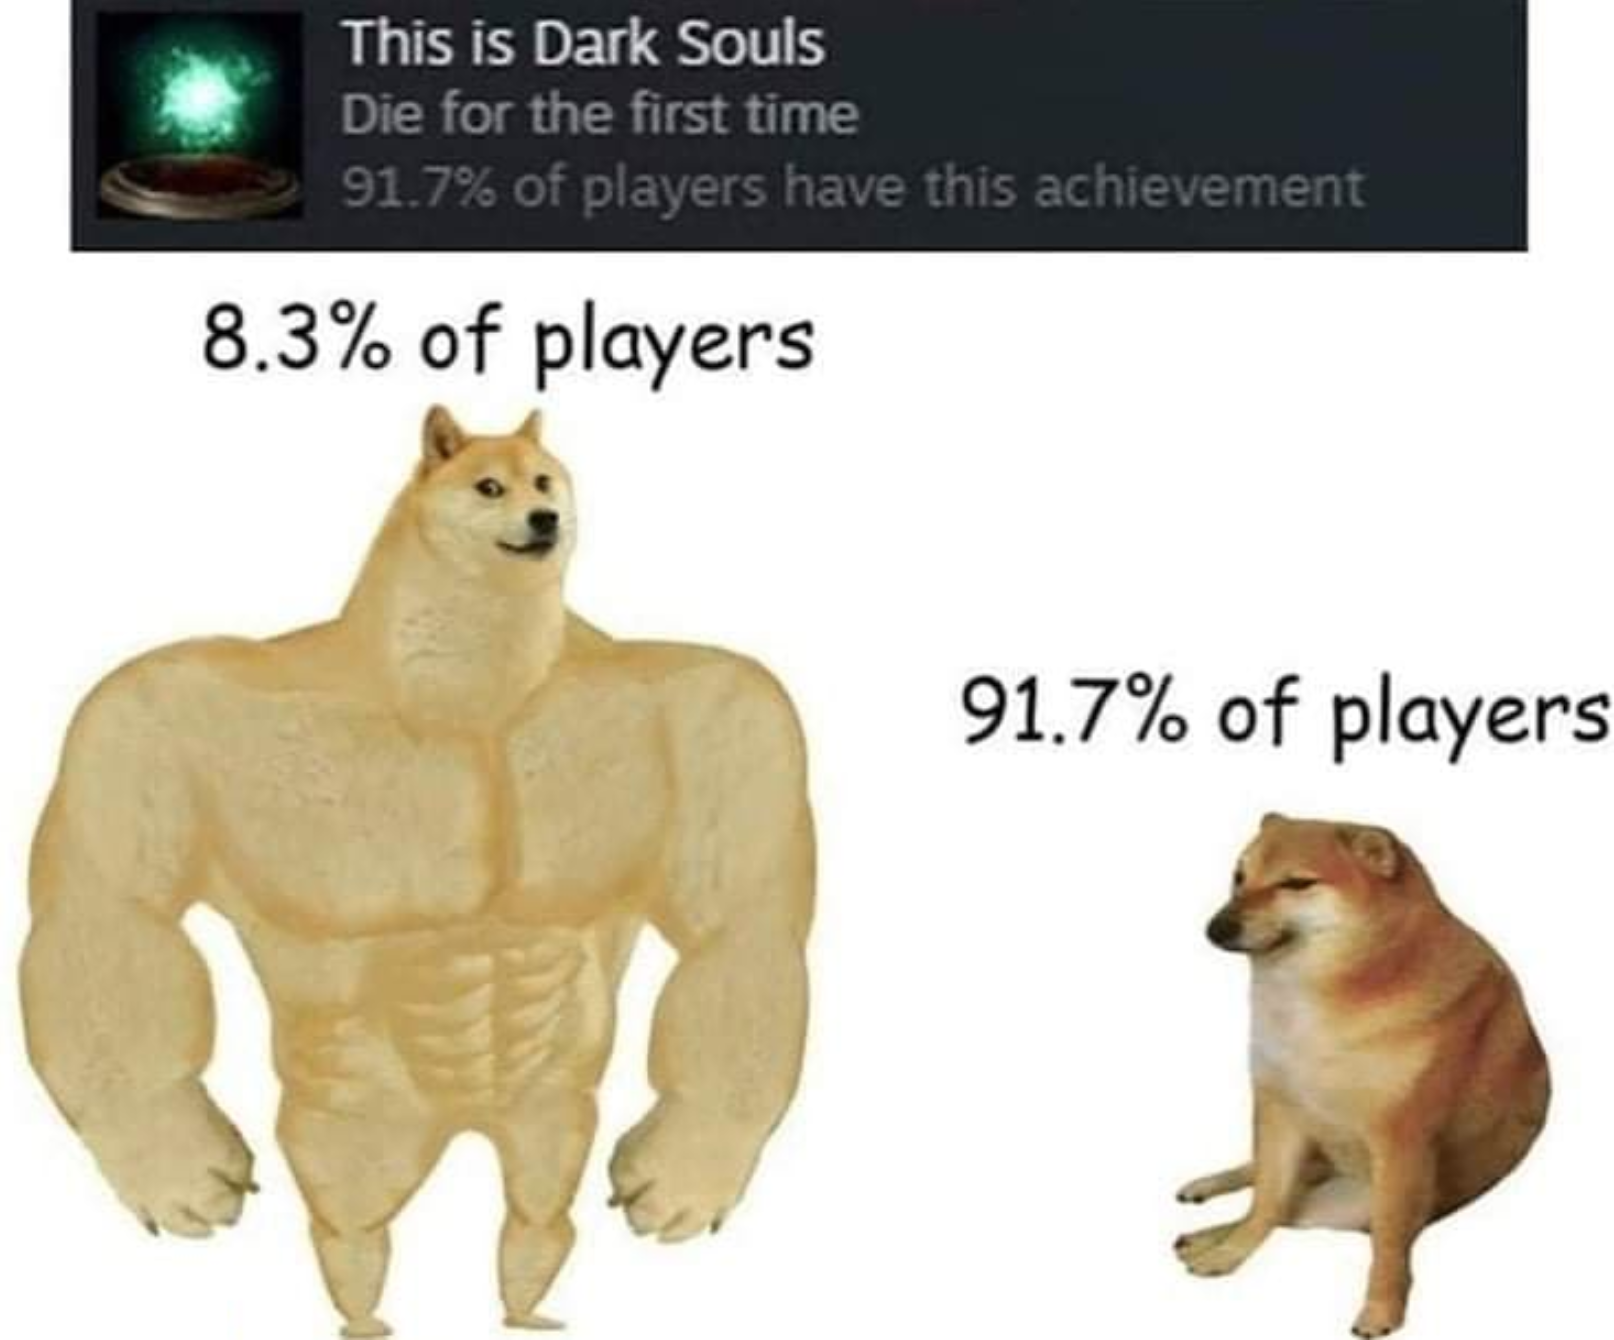 funny gaming memes - dark souls meme - This is Dark Souls Die for the first time 91.7% of players have this achievement 8.3% of players 91.7% of players